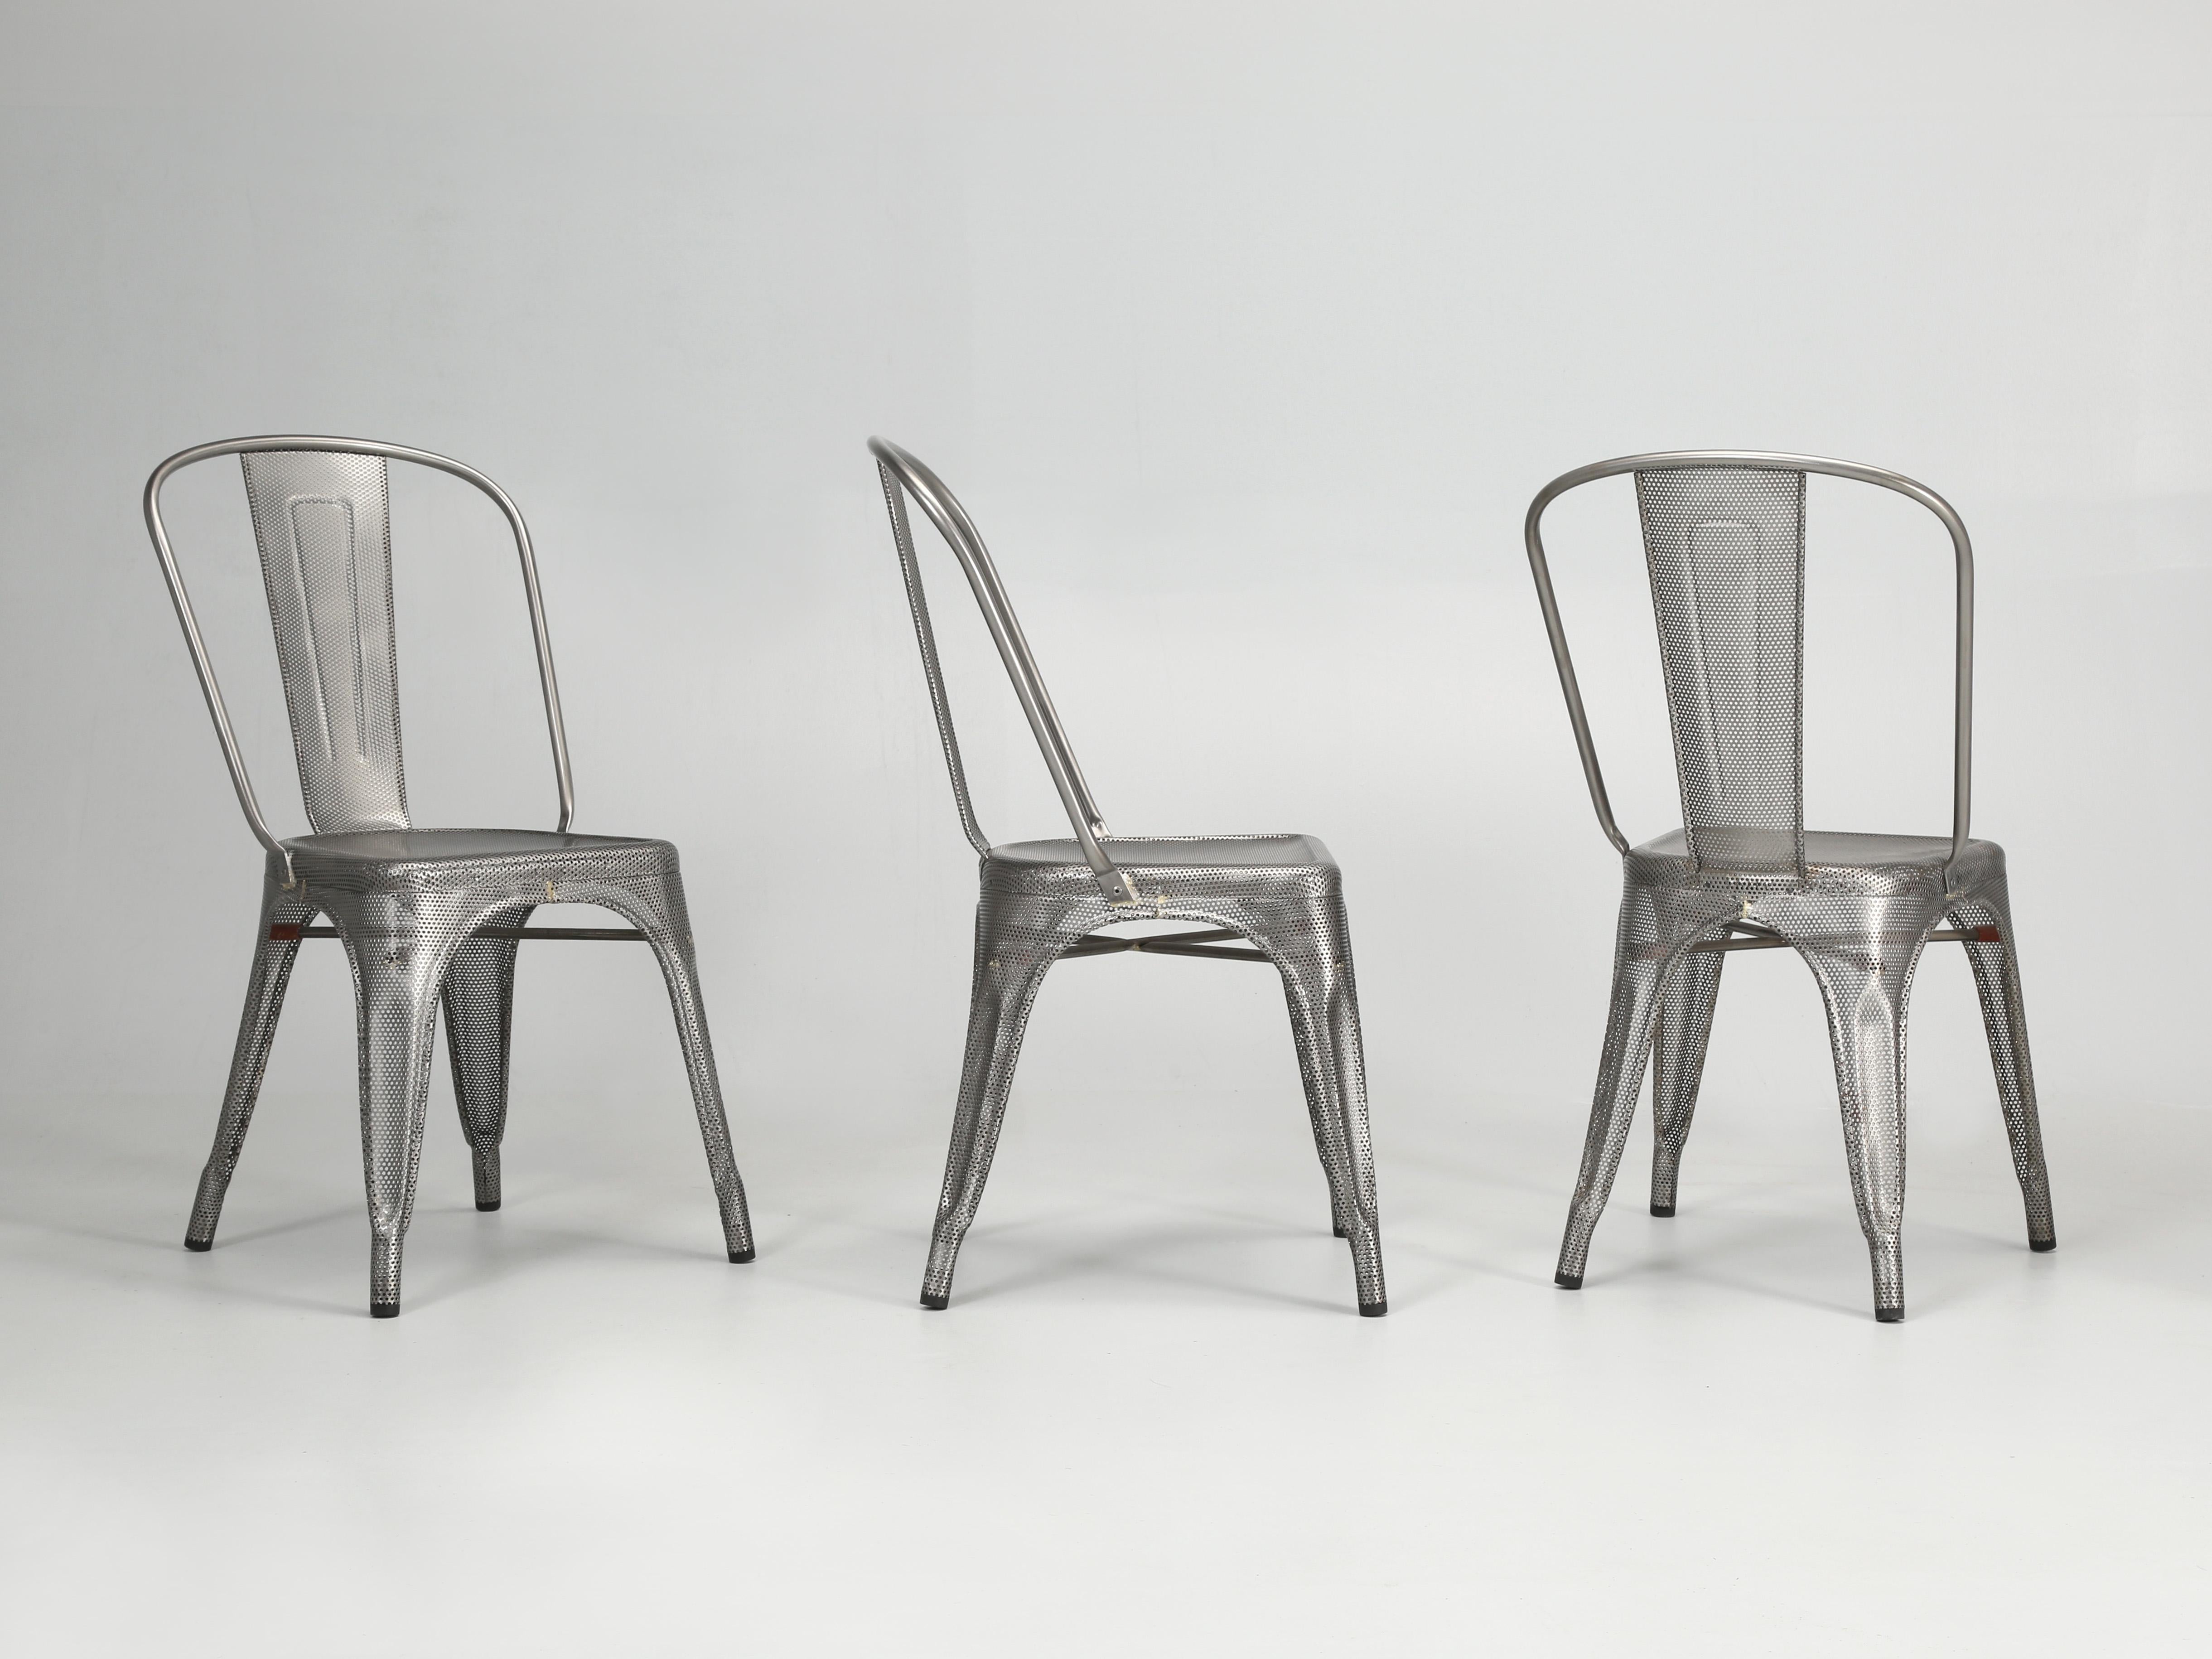 Industrial New Tolix Wire Mesh Chairs Set '4' Showroom Samples 1500 Tolix Pieces Available